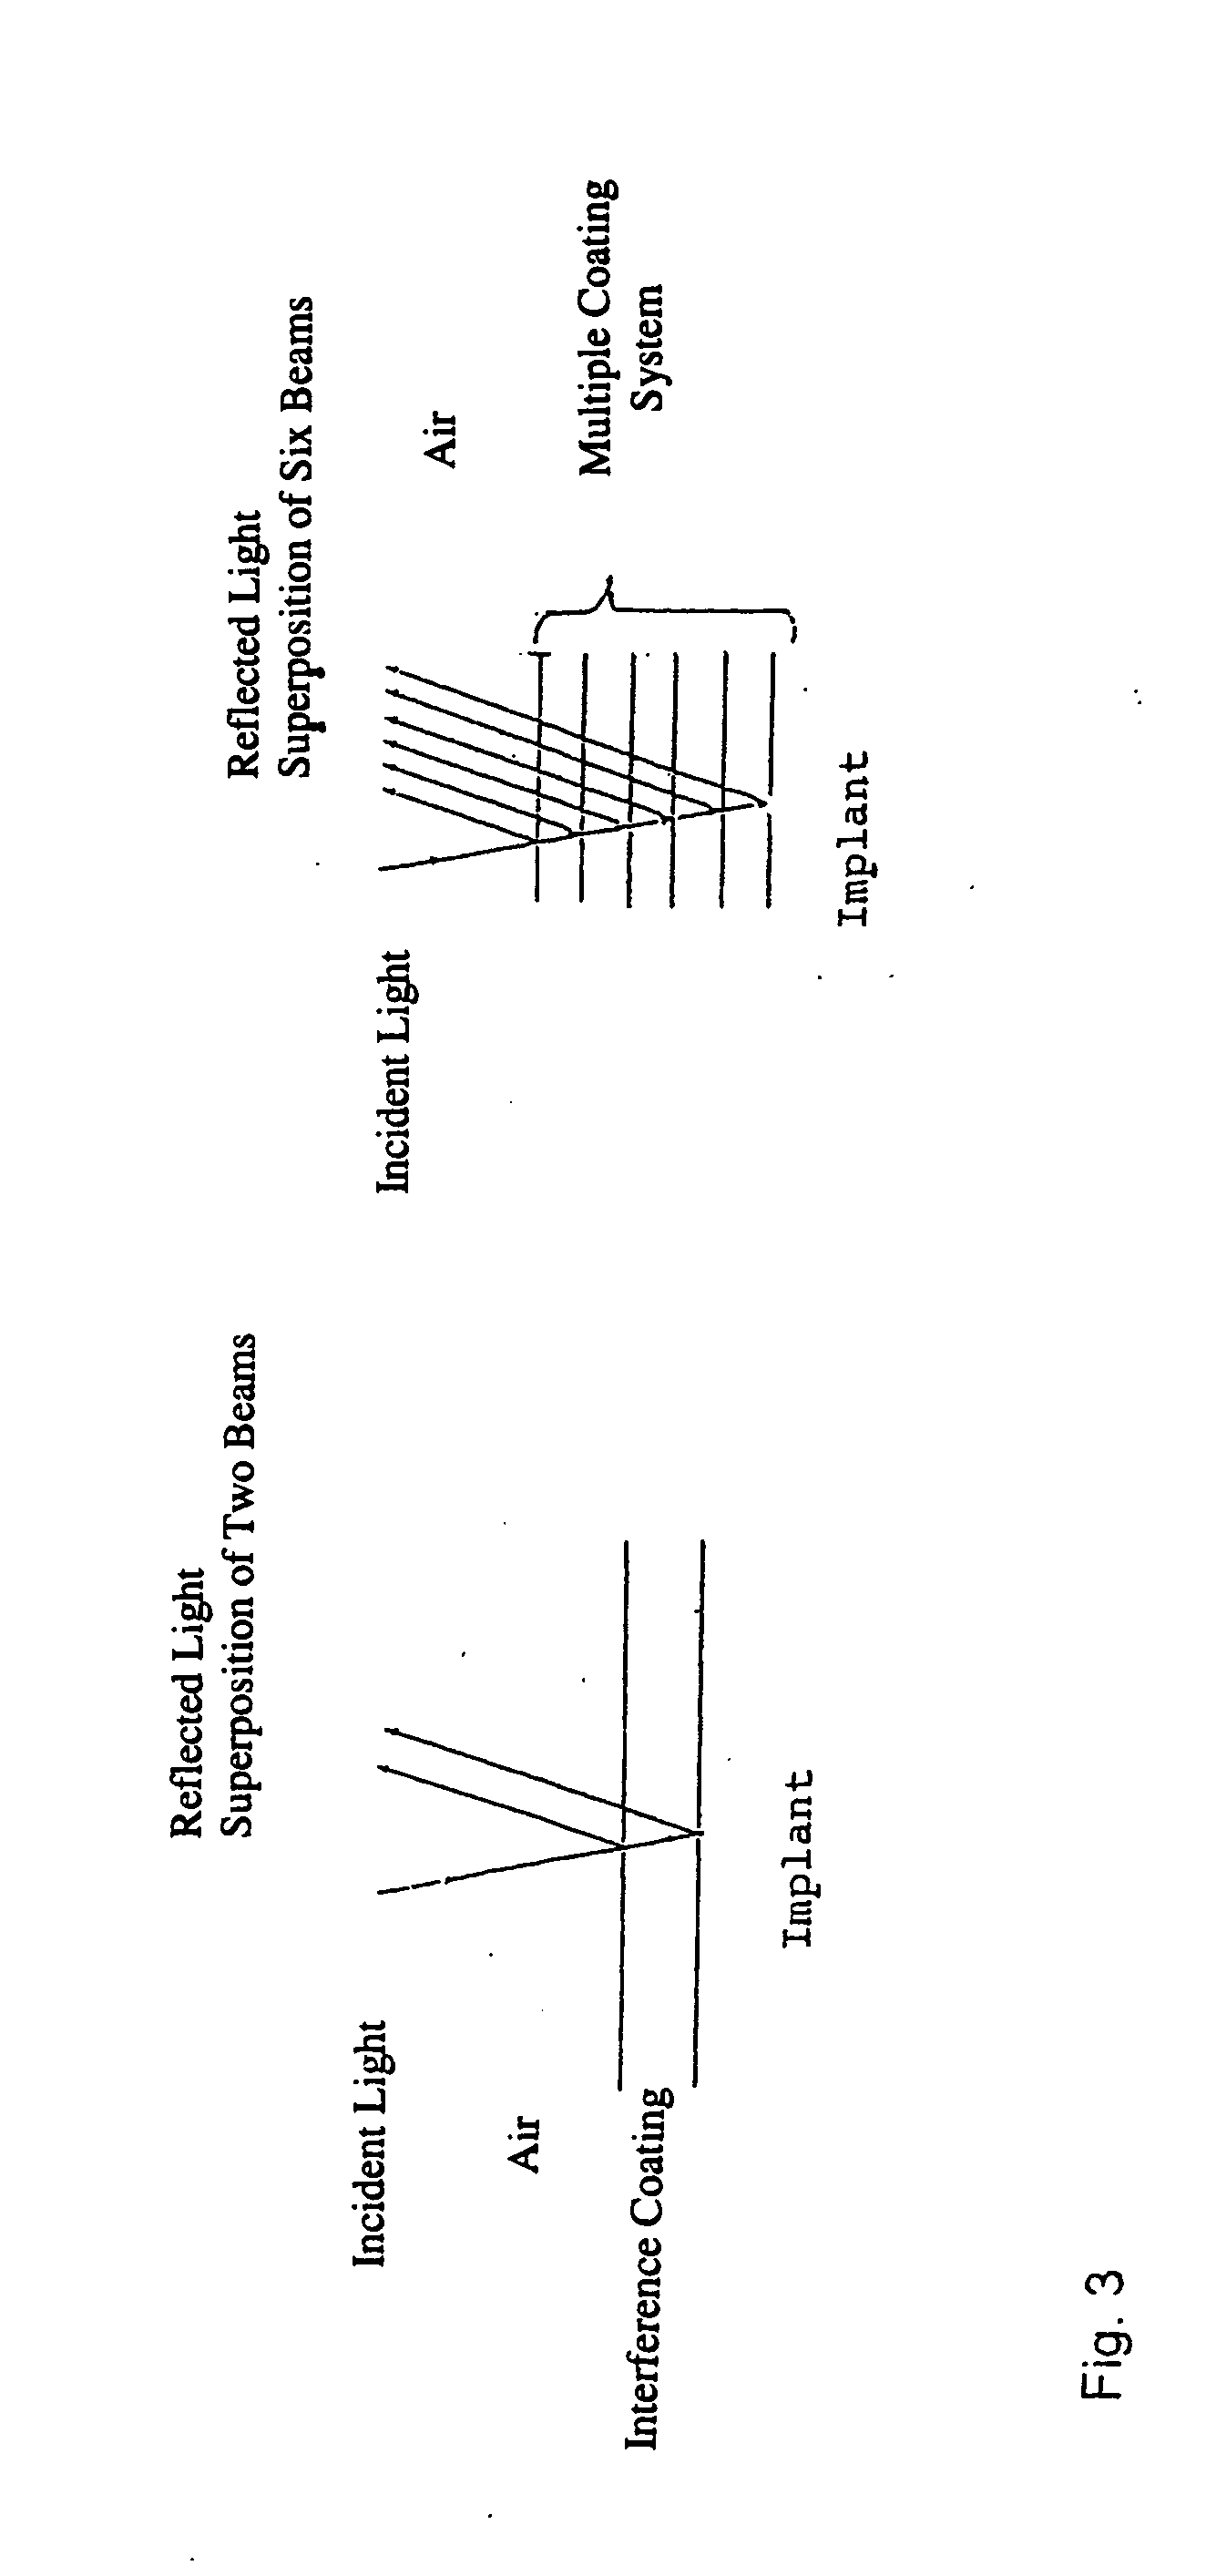 Interference generating, colored coating for surgical implants and instruments